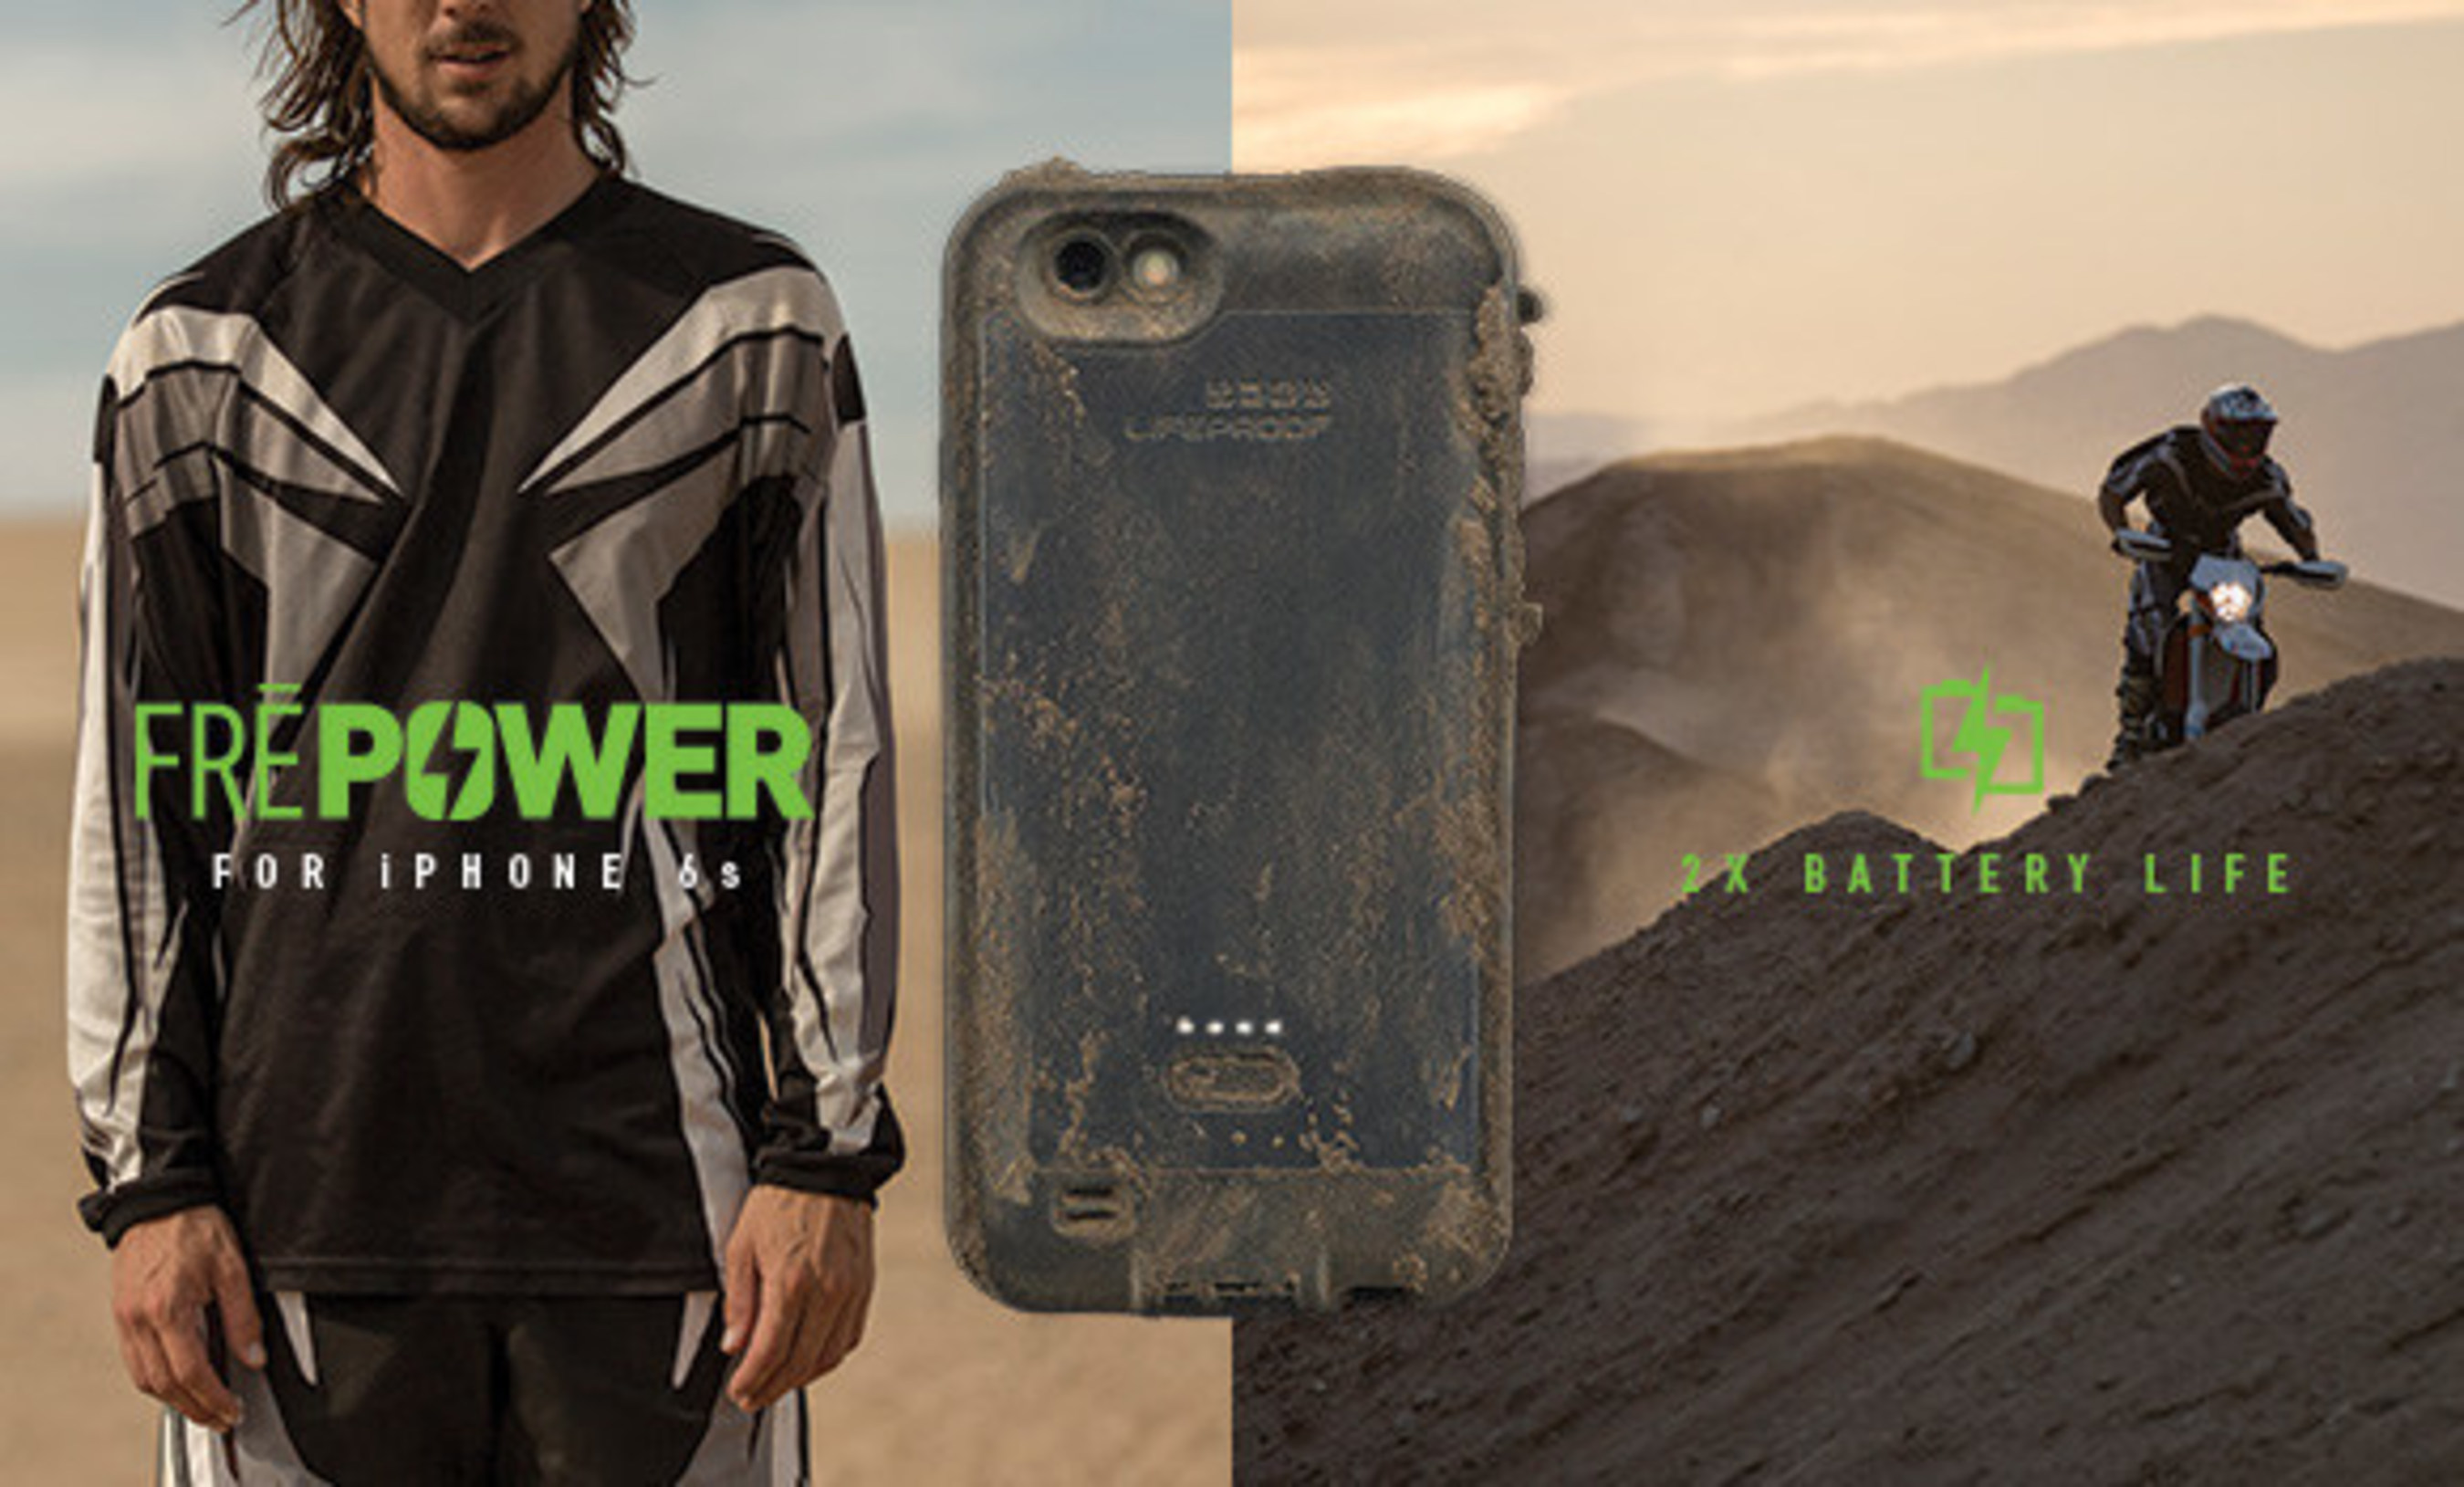 LifeProof announces FRE Power for iPhone 6s, available for pre-order today on lifeproof.com.